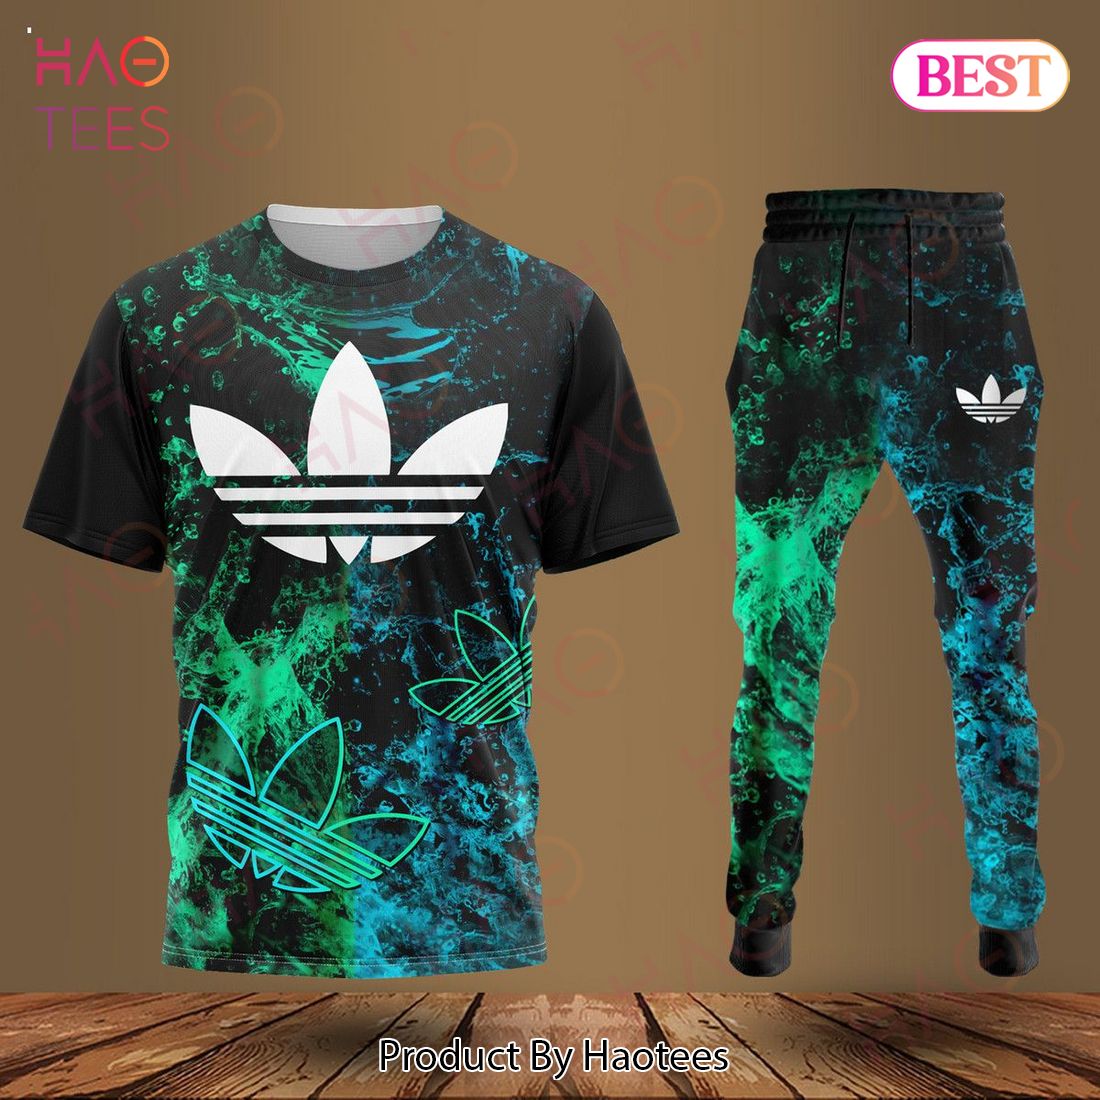 Adidas Tie Dye Black Blue Green T-Shirt And Pants Luxury Brand Limited Edition